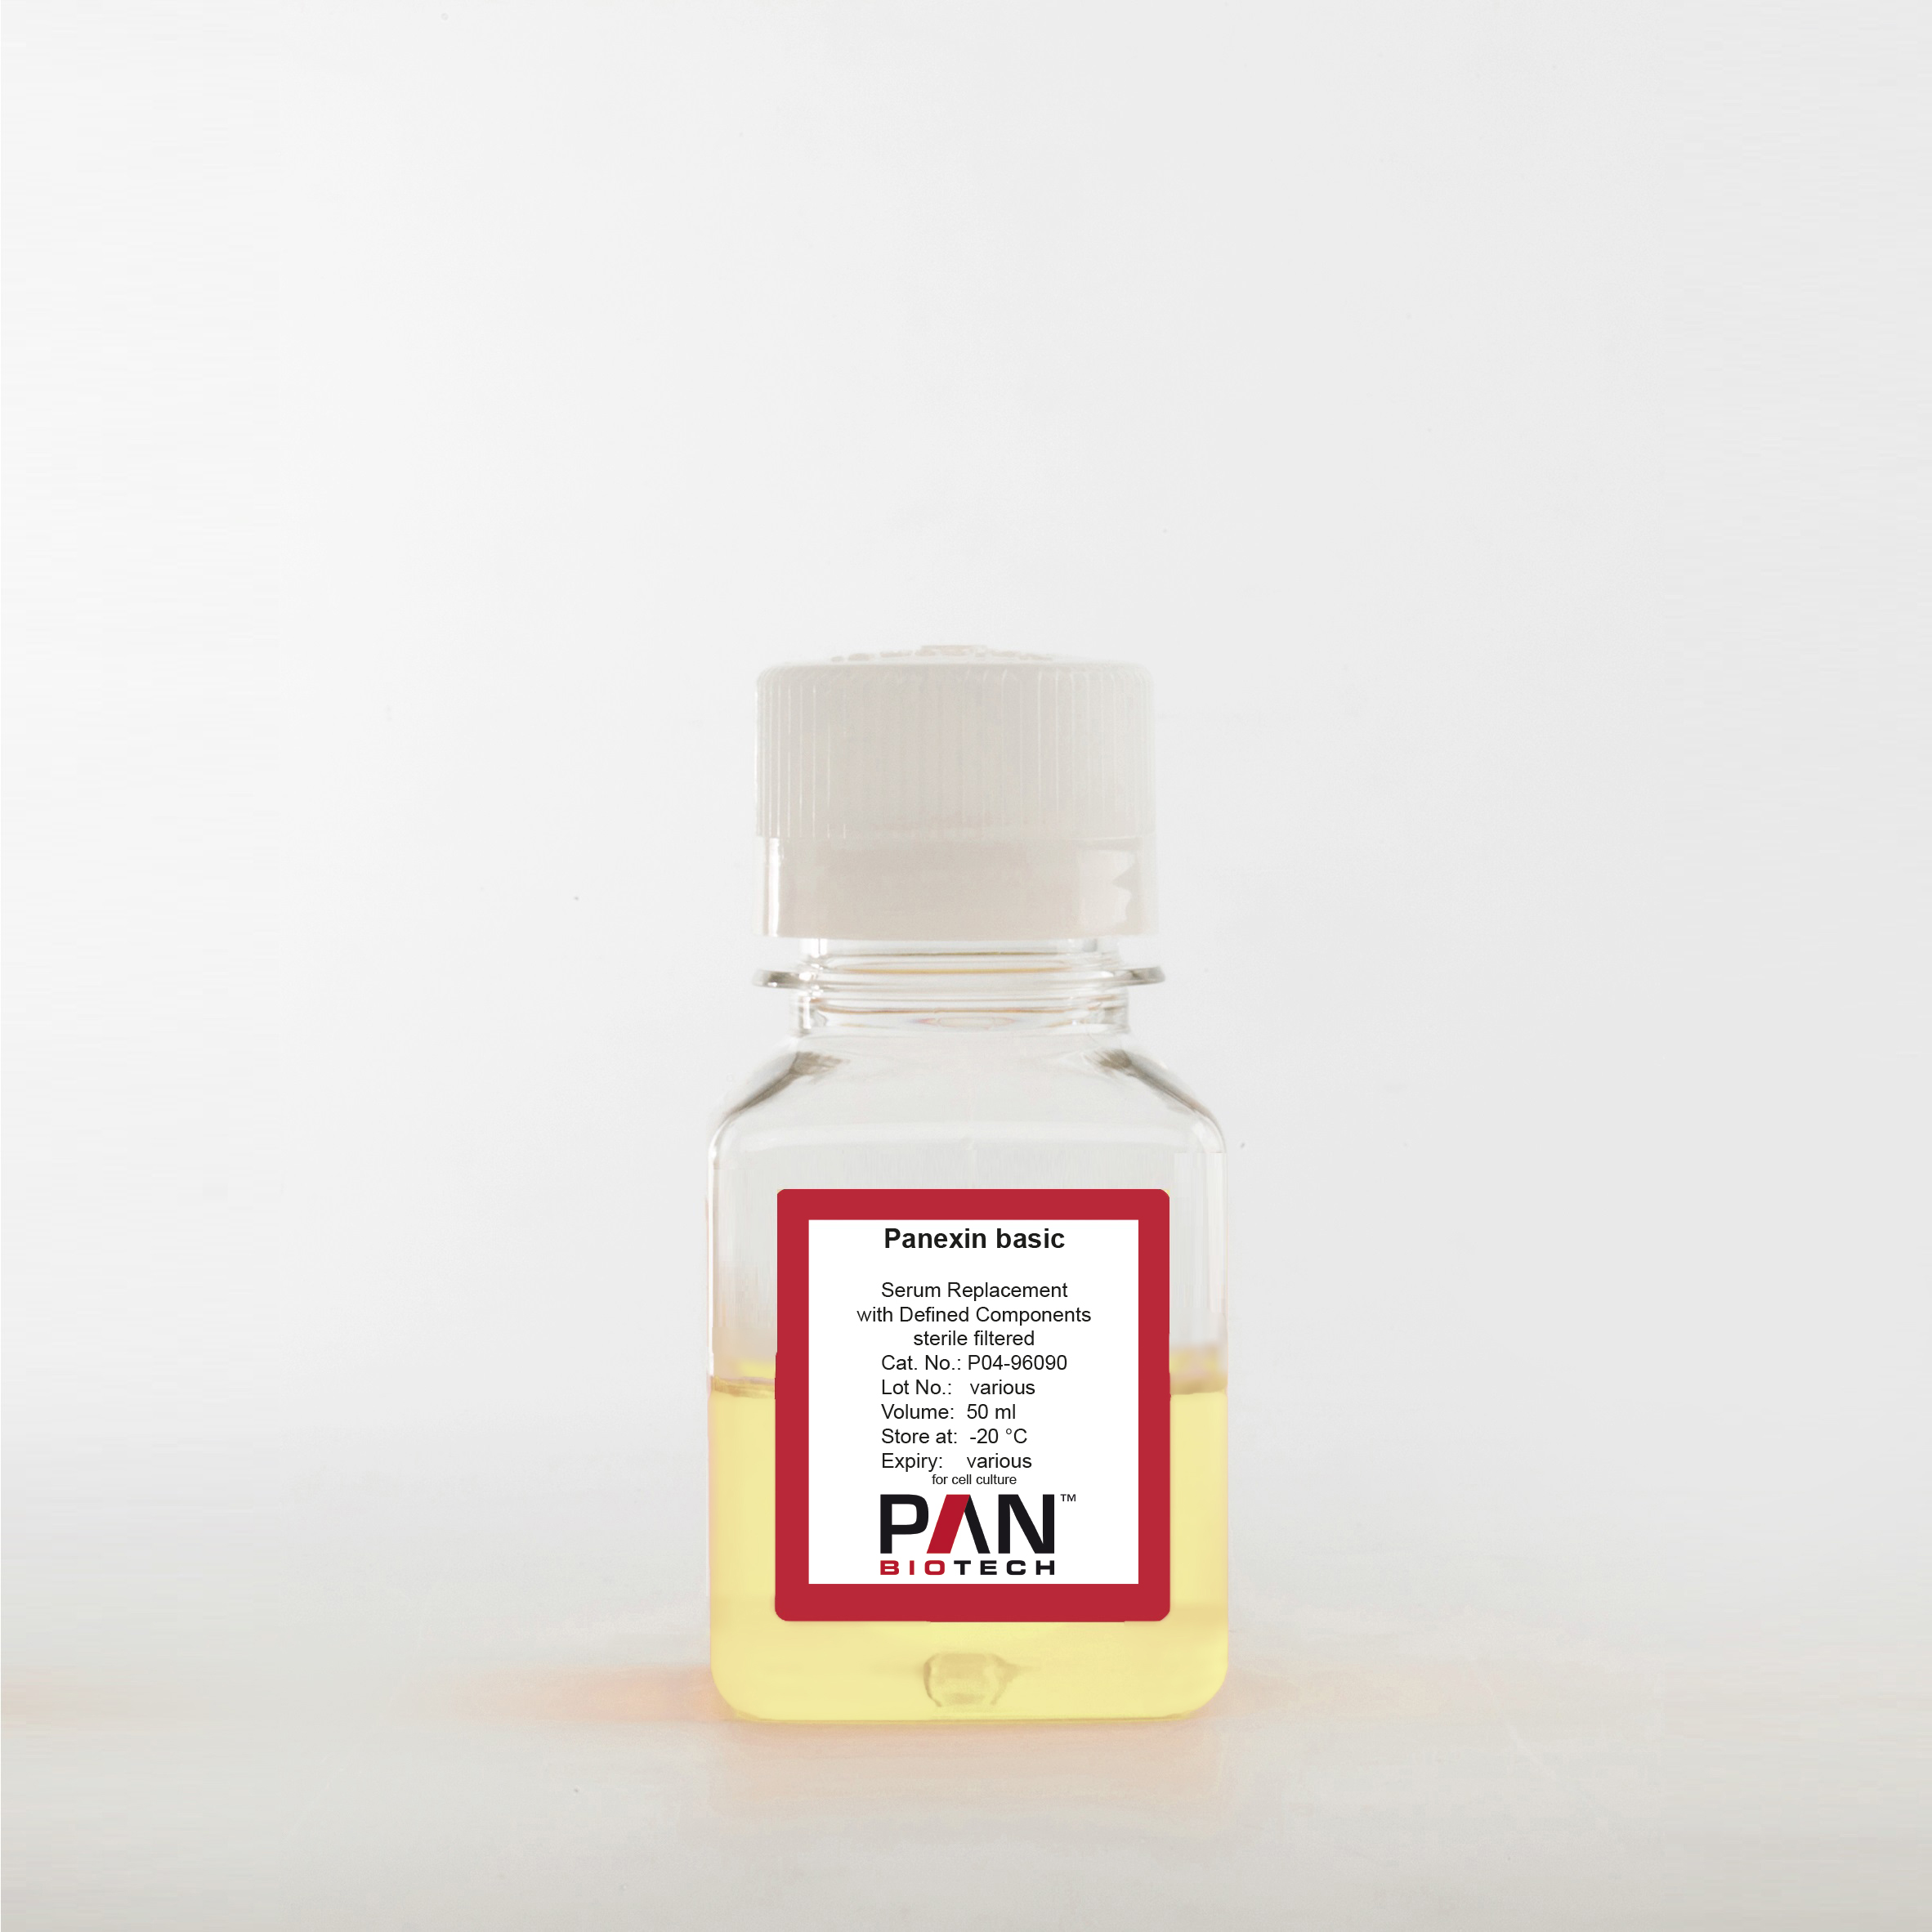 Panexin basic, Serum Replacement with Defined Components